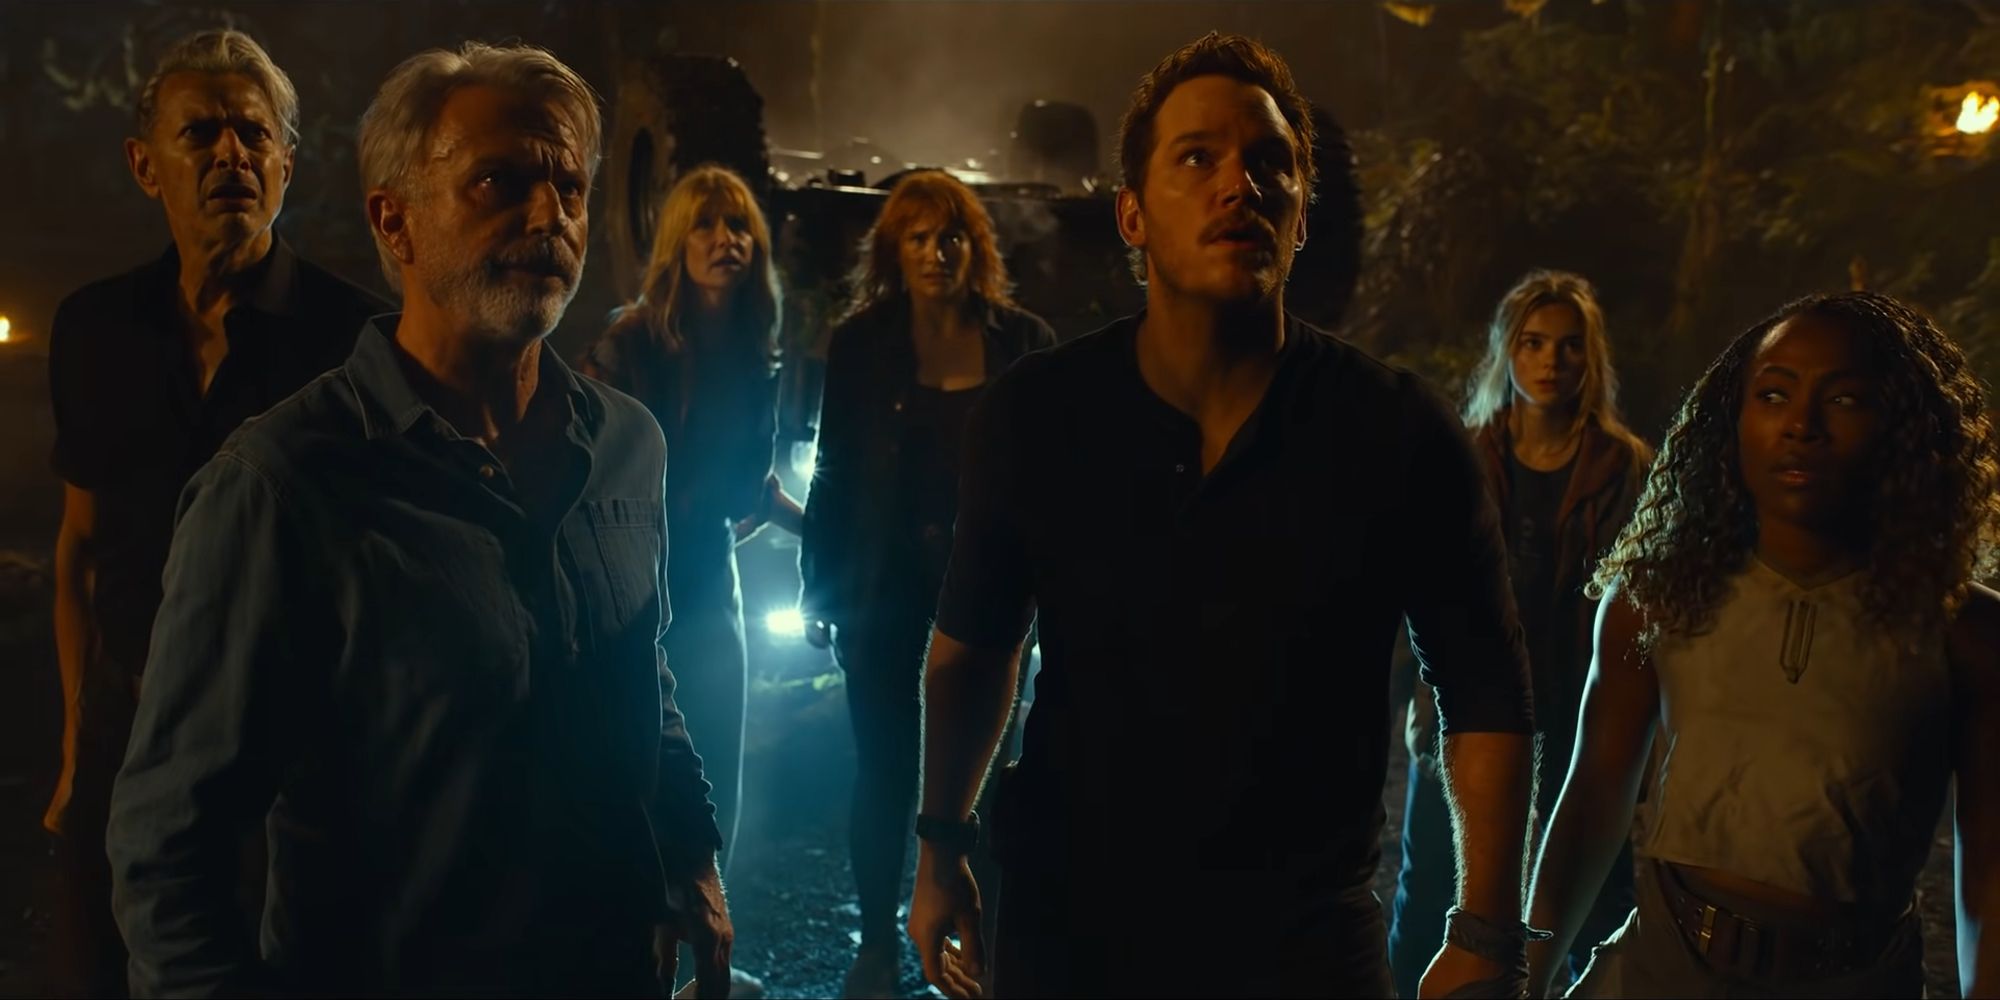 The characters of Jurassic Park and Jurassic World united in Jurassic World Dominion